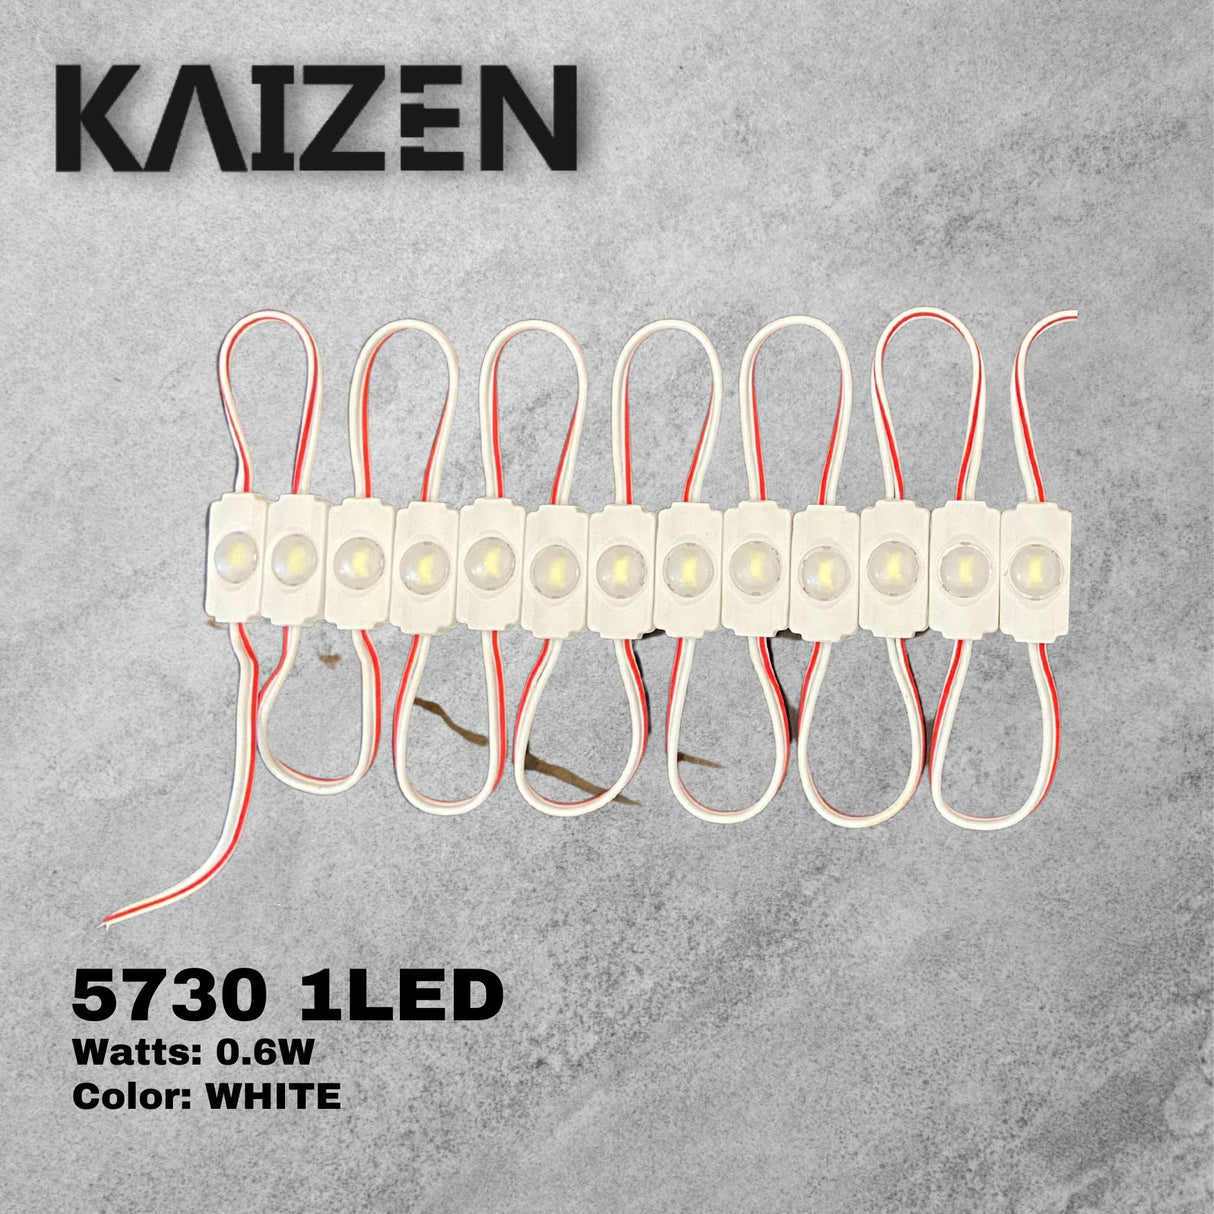 Kaizen SMD 5730 1 LED Injected Module w/ Lens